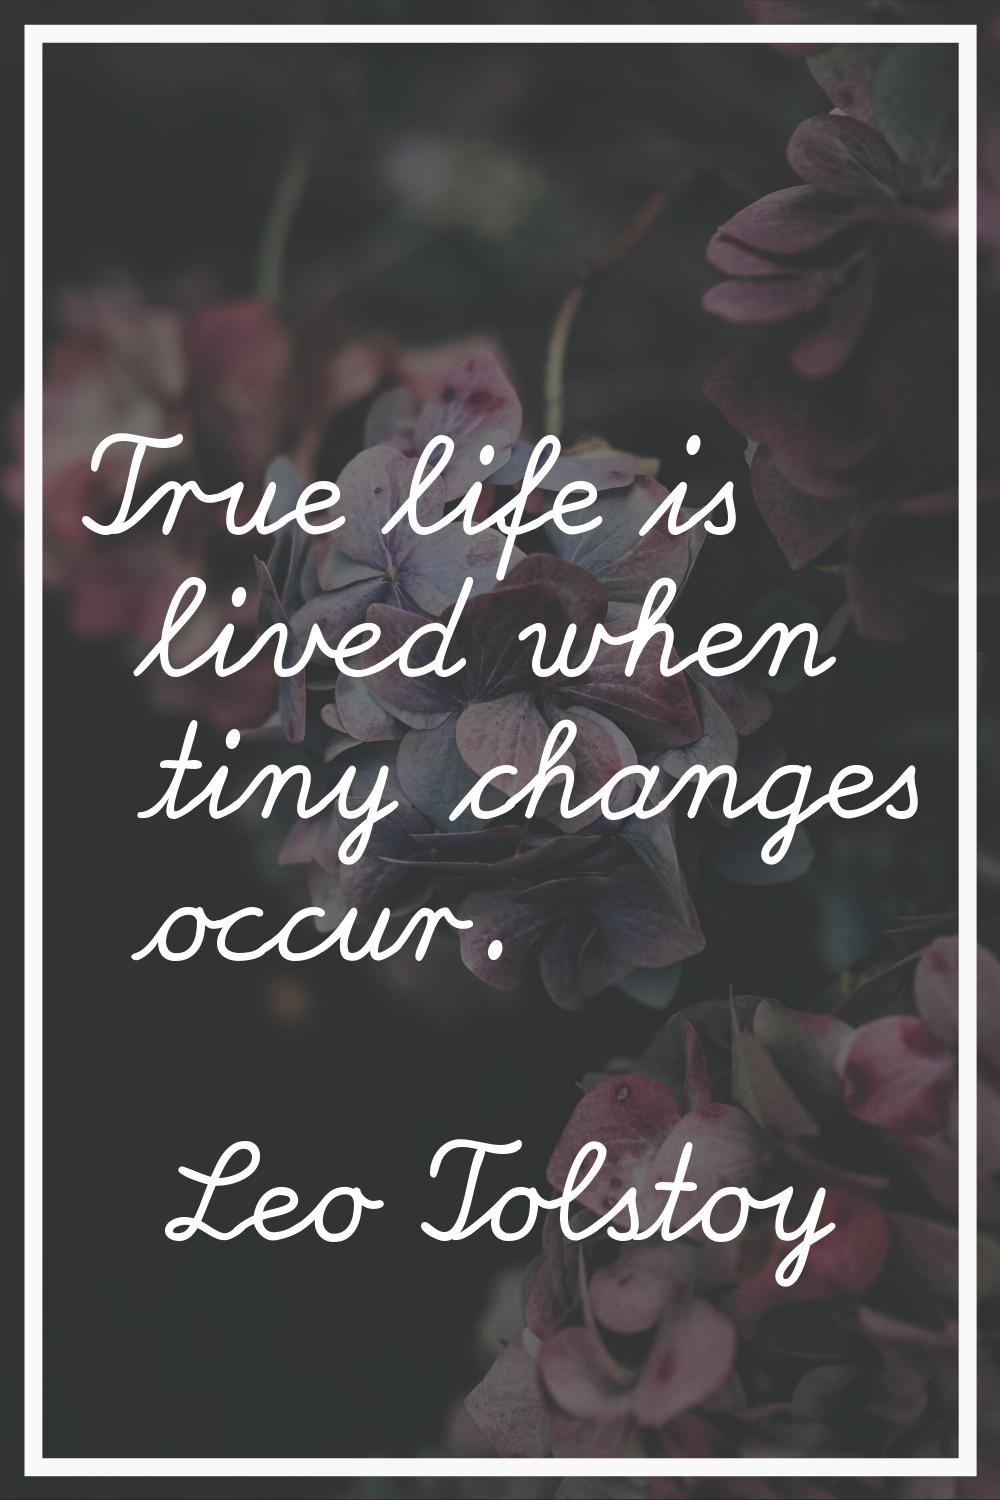 True life is lived when tiny changes occur.